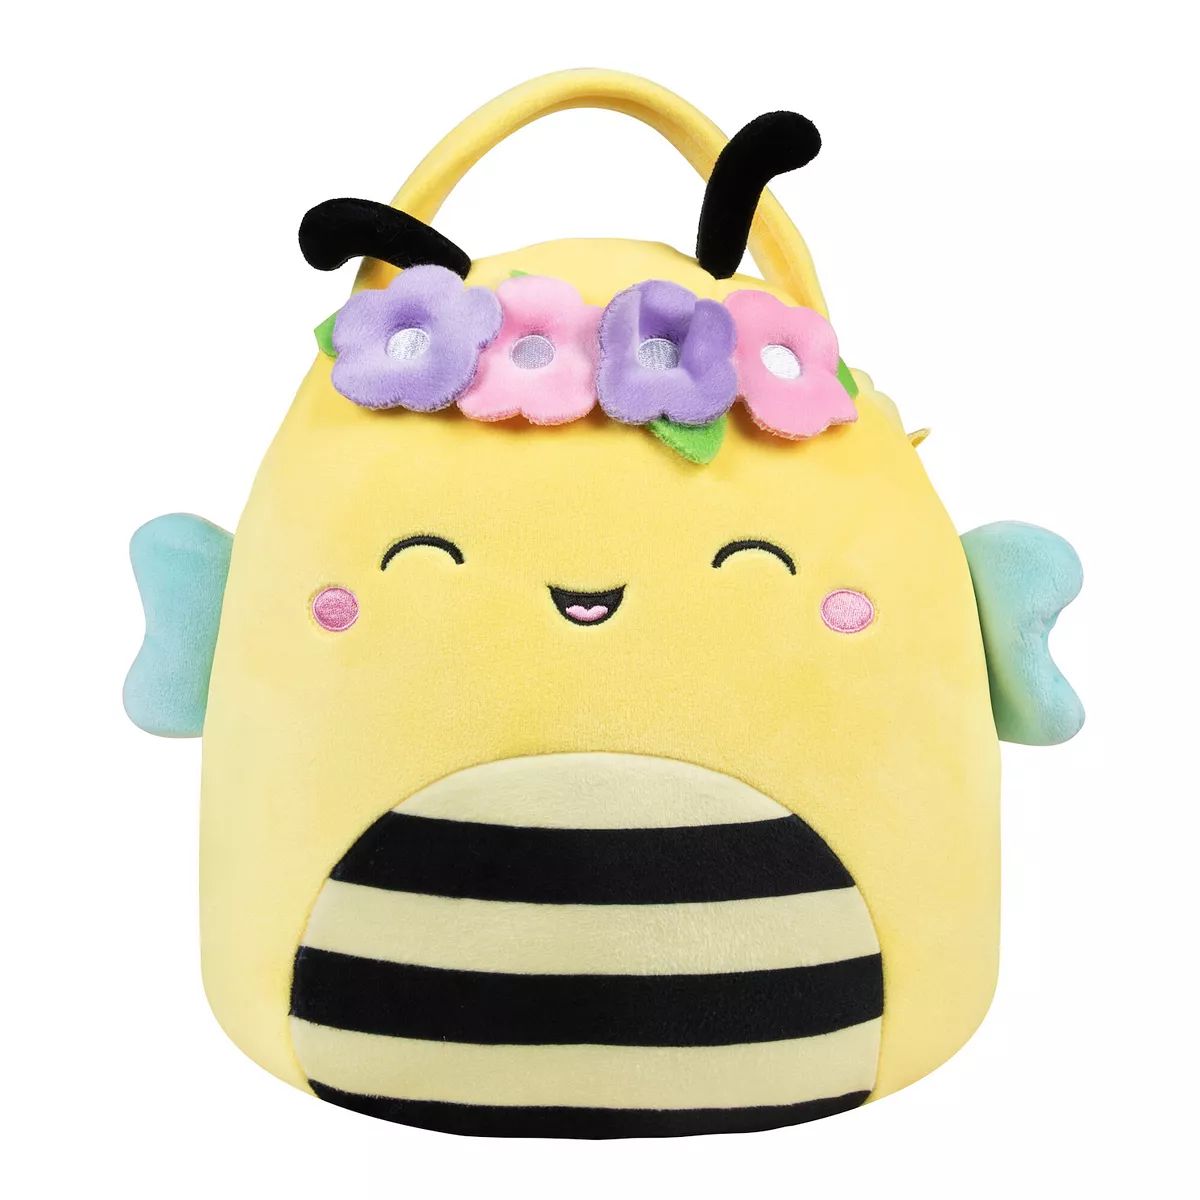 Squishmallows 12-in. Sqush Sunny the Bee with Flower Crown | Kohl's